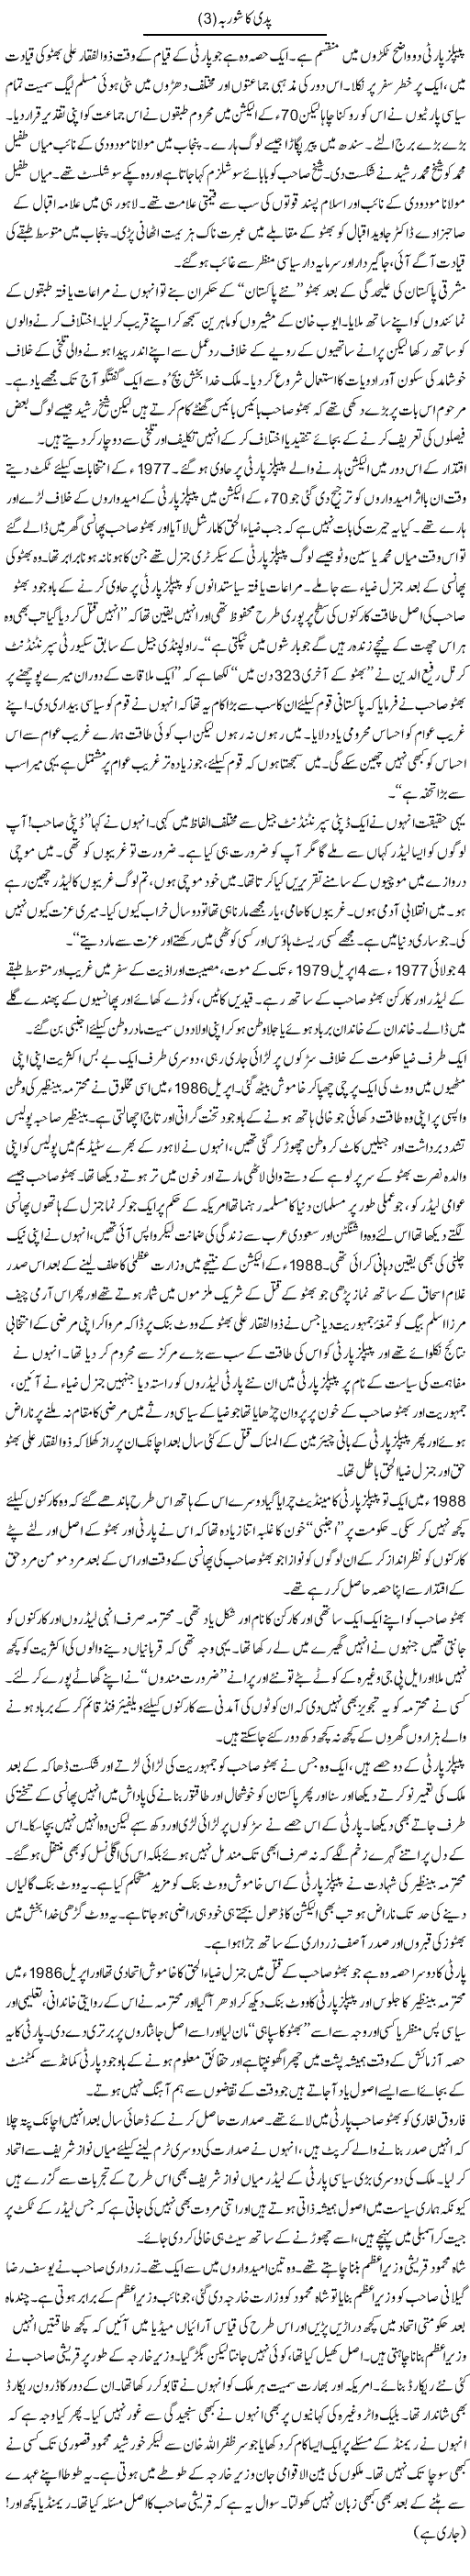 People Party Express Column Abbas Athar 26 February 2011